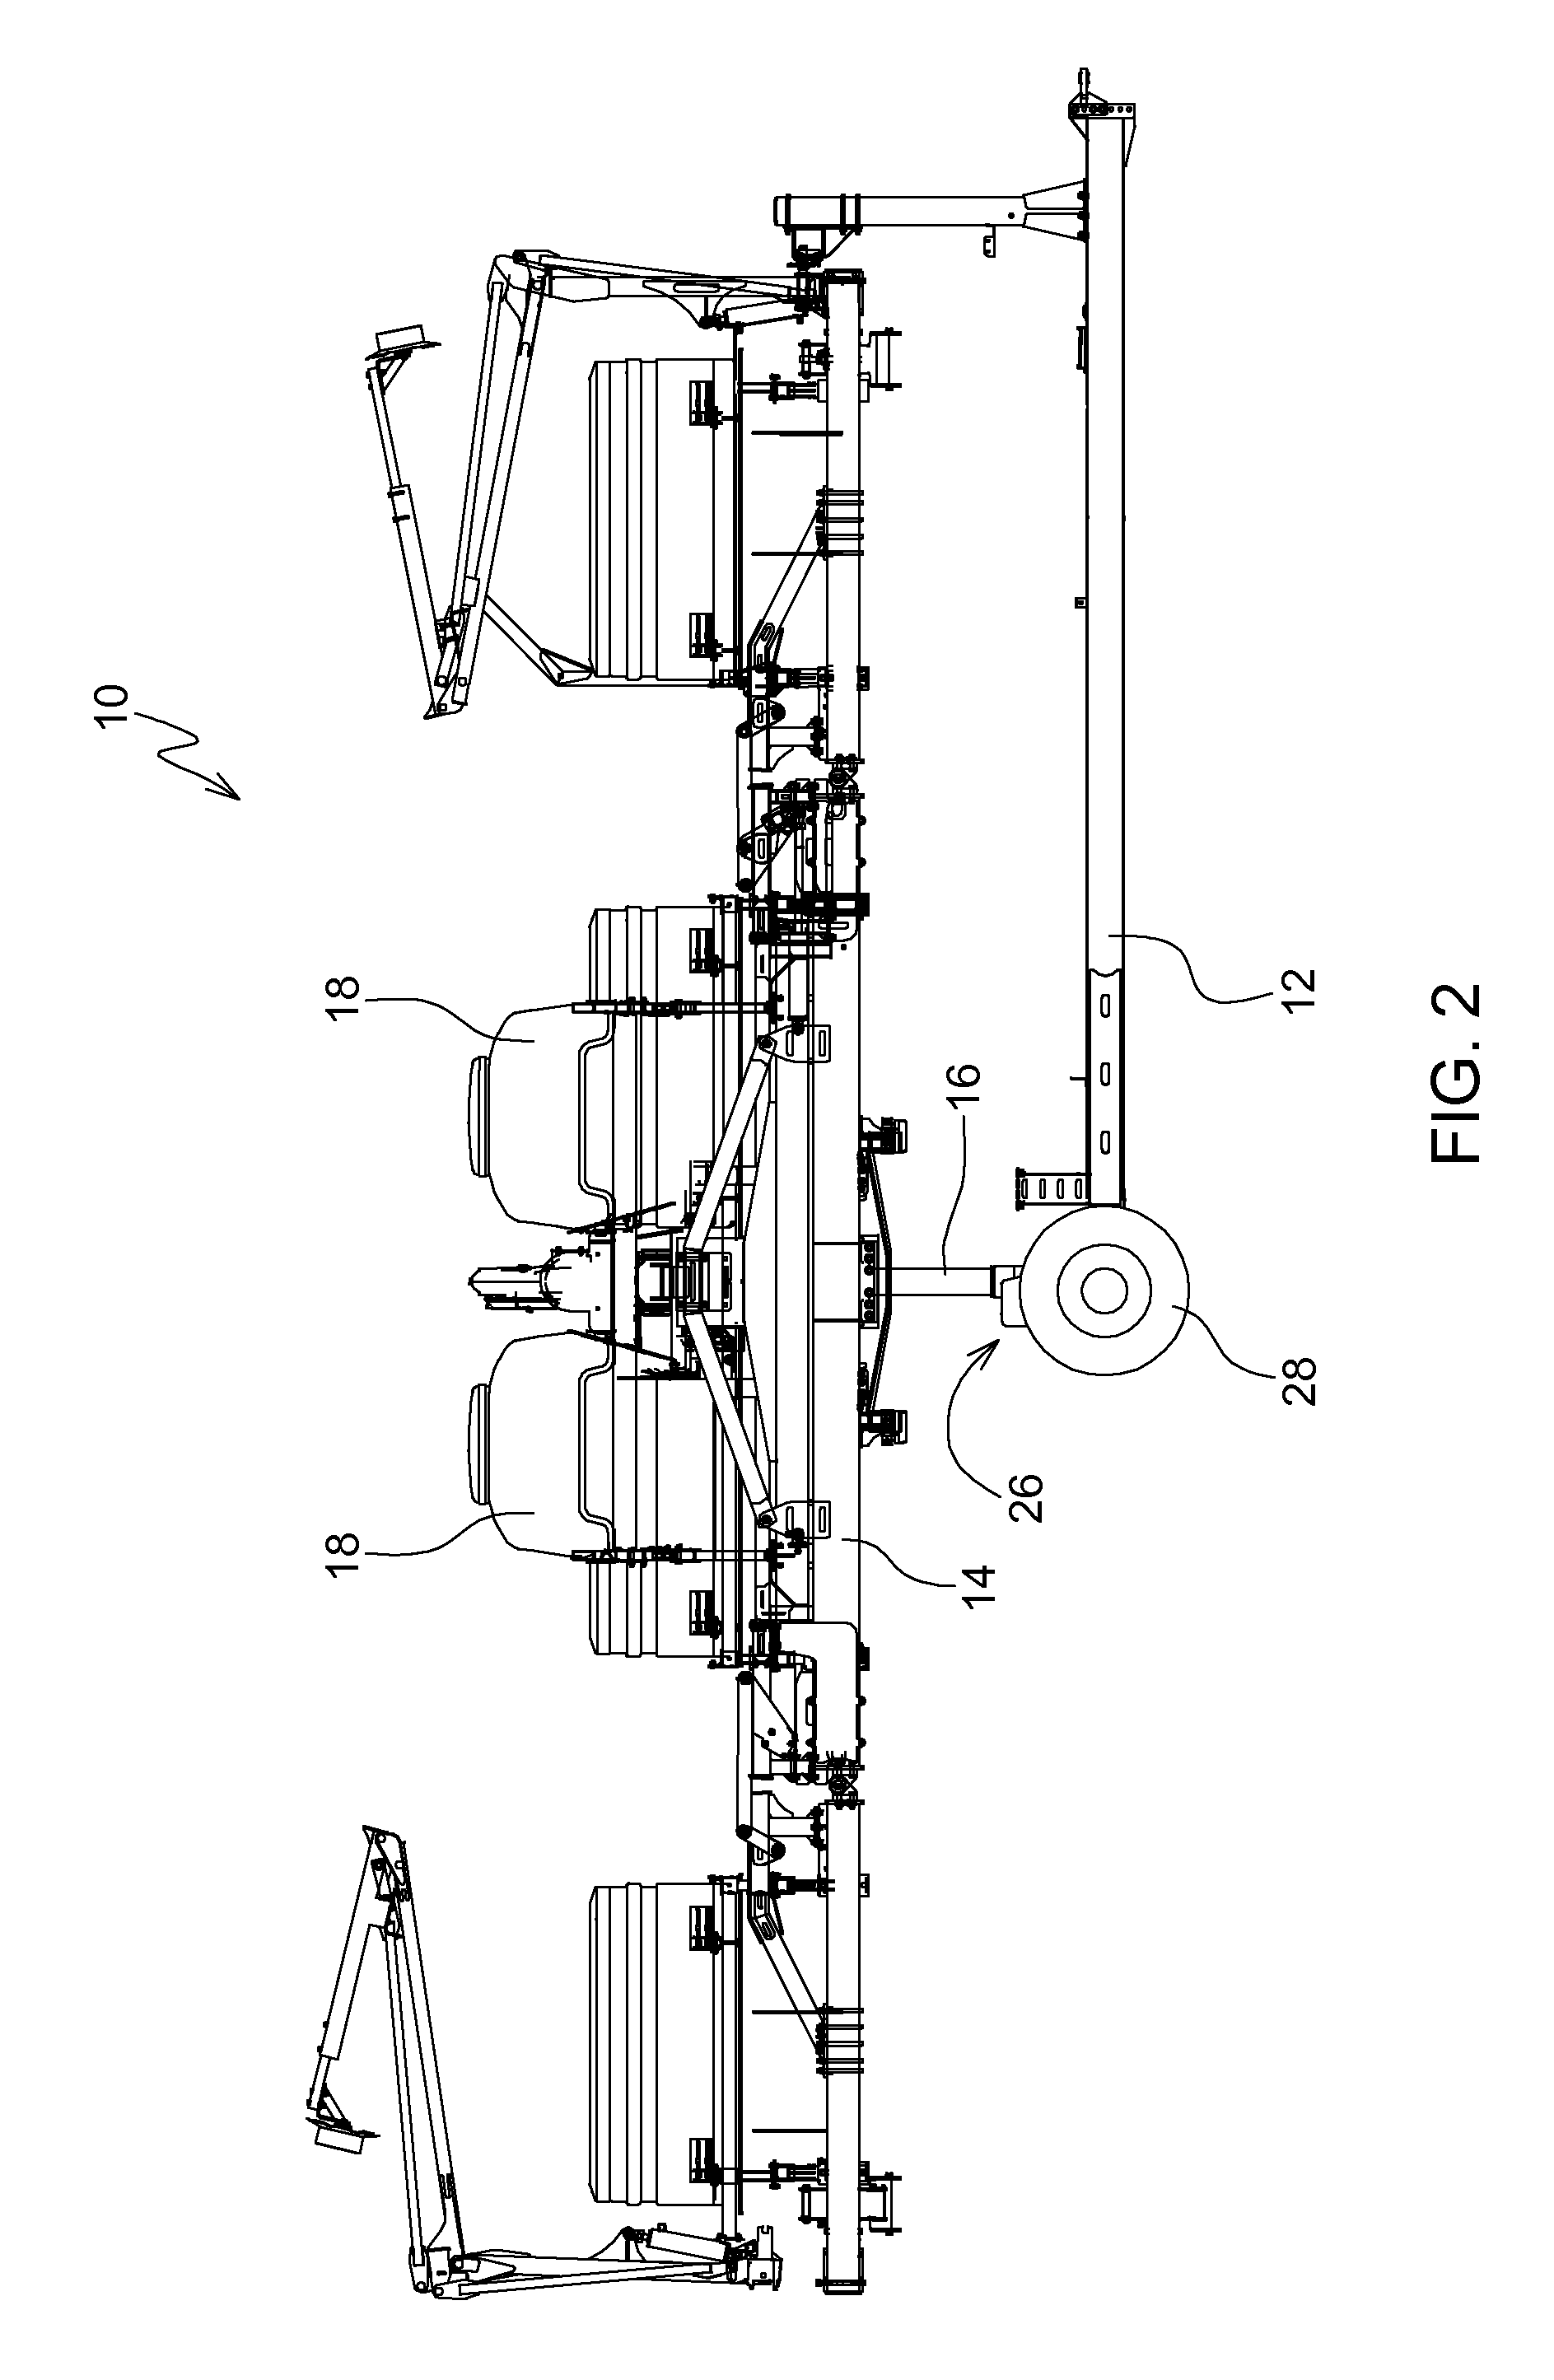 Supply line connecting device in a foldable agricultural machine